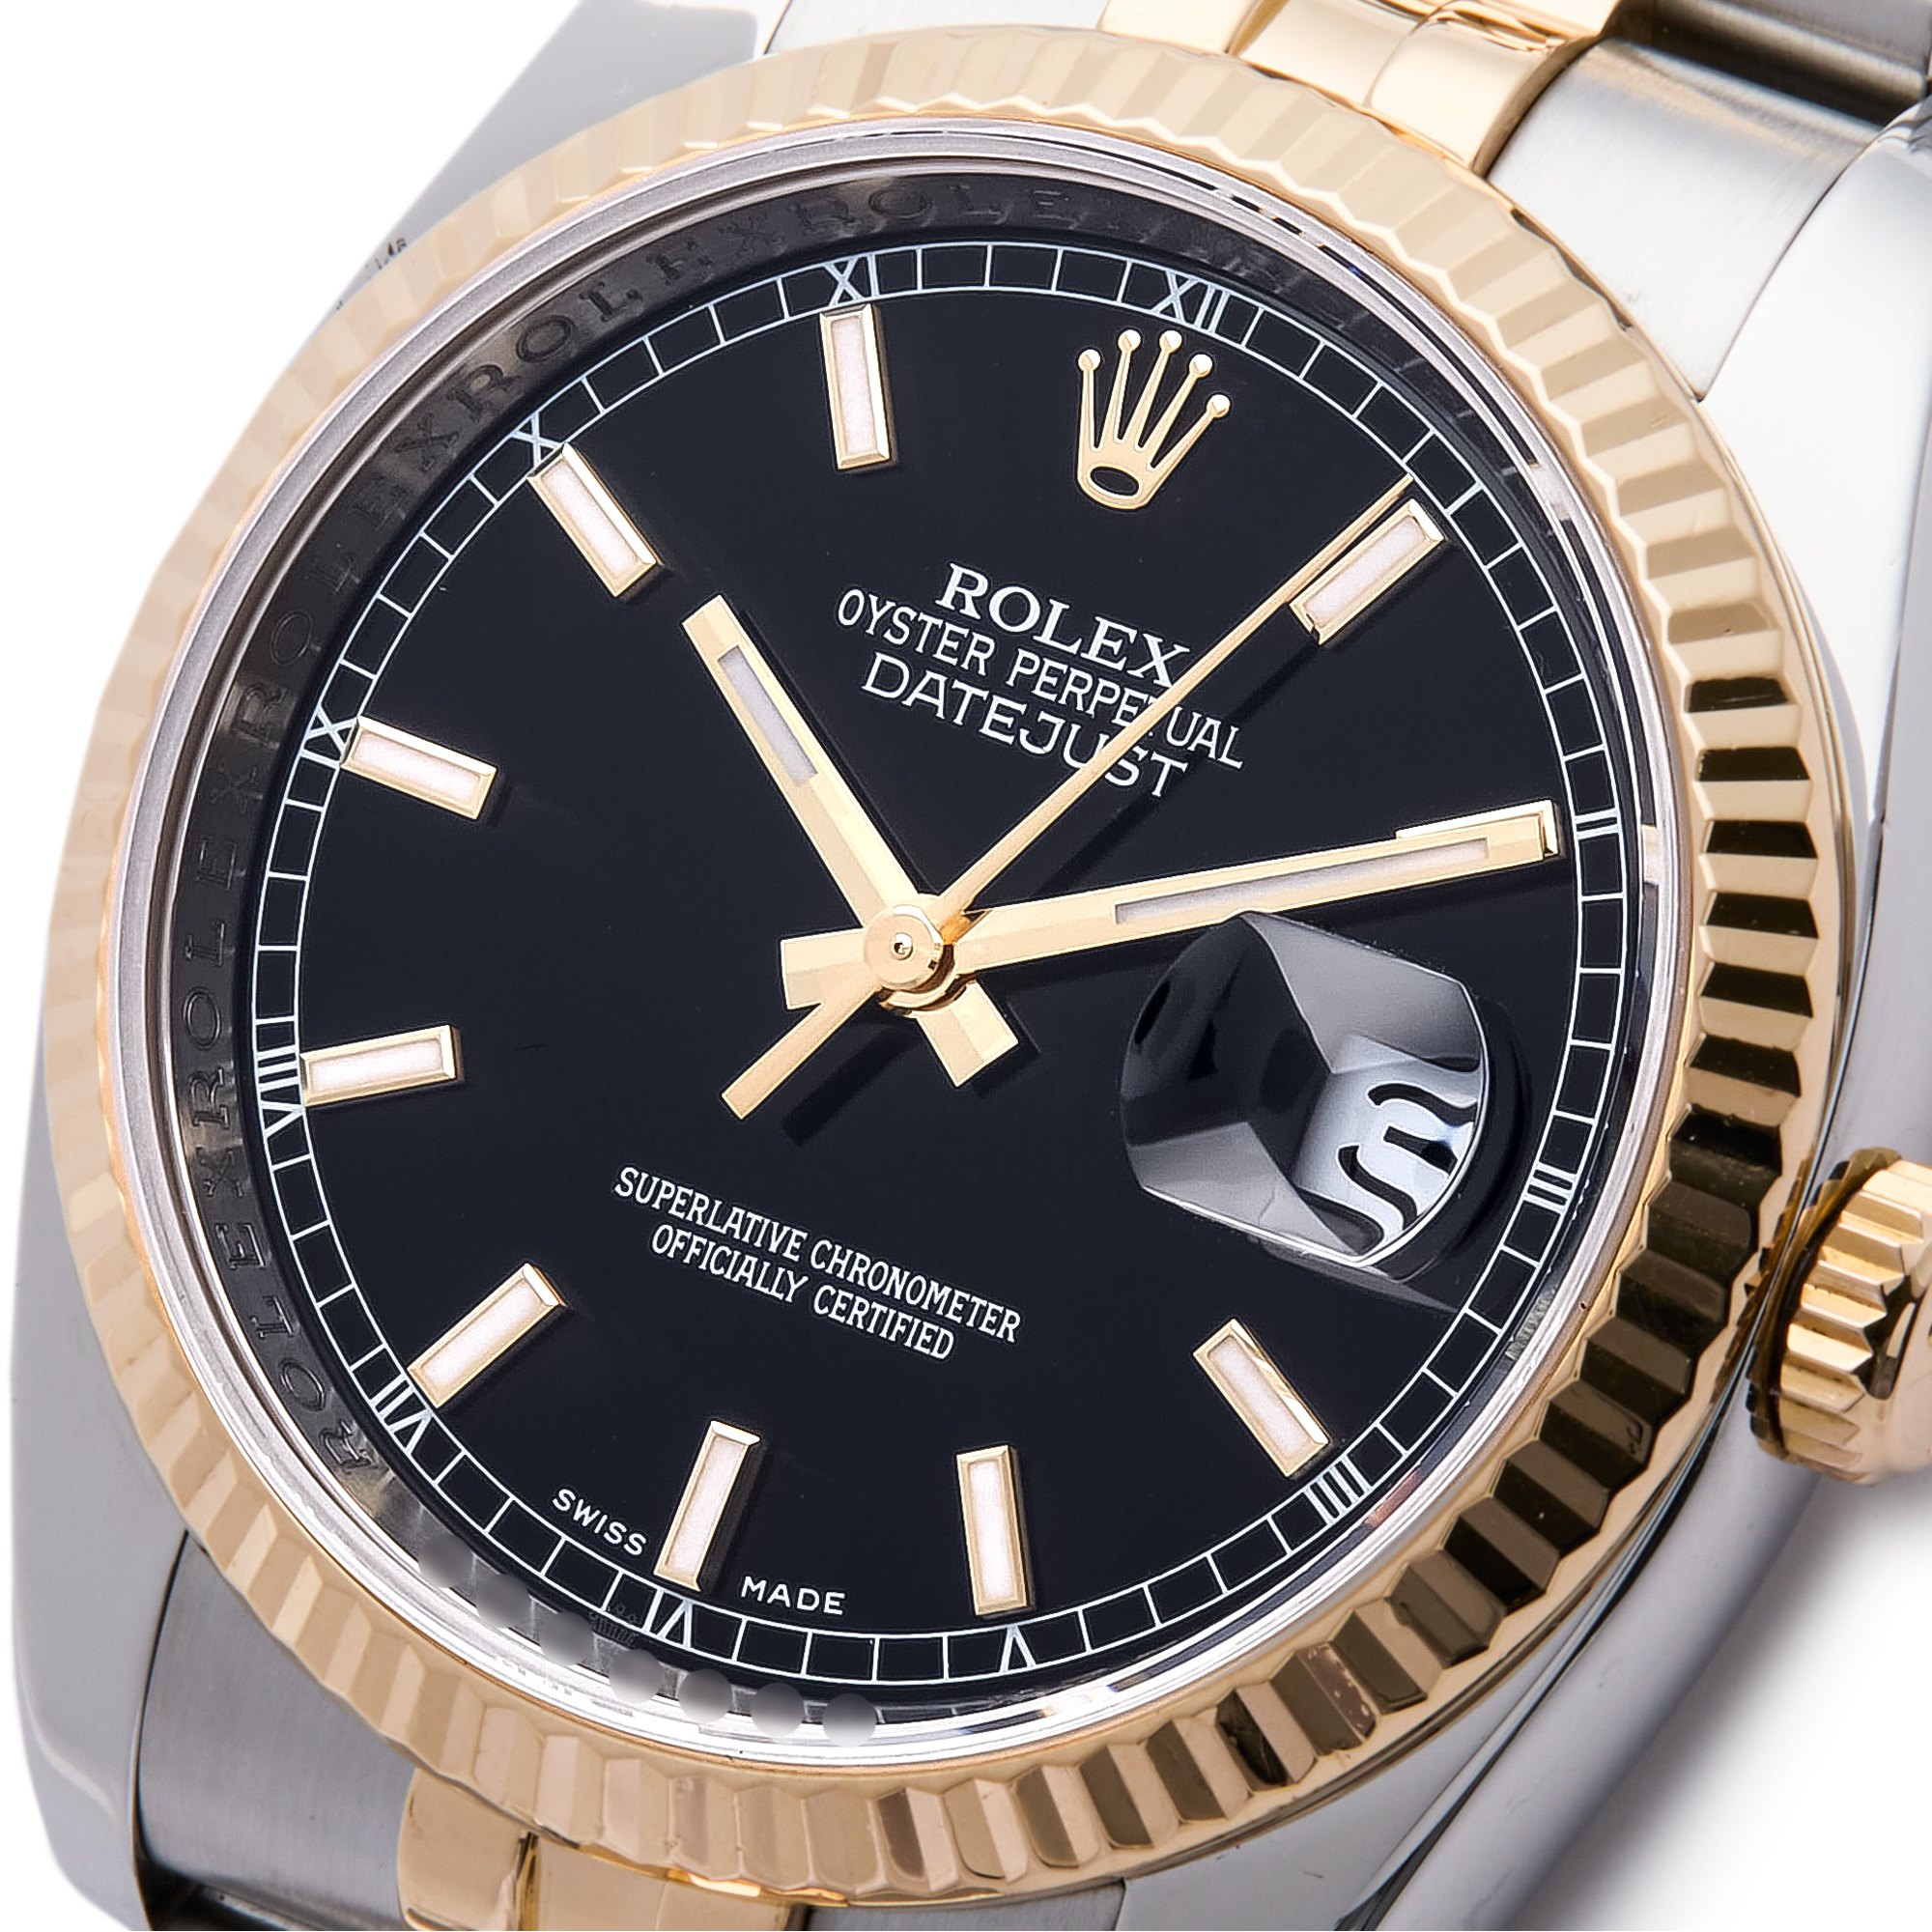 Rolex Datejust 36 Roulette Date Wheel Yellow Gold & Stainless Steel 116233